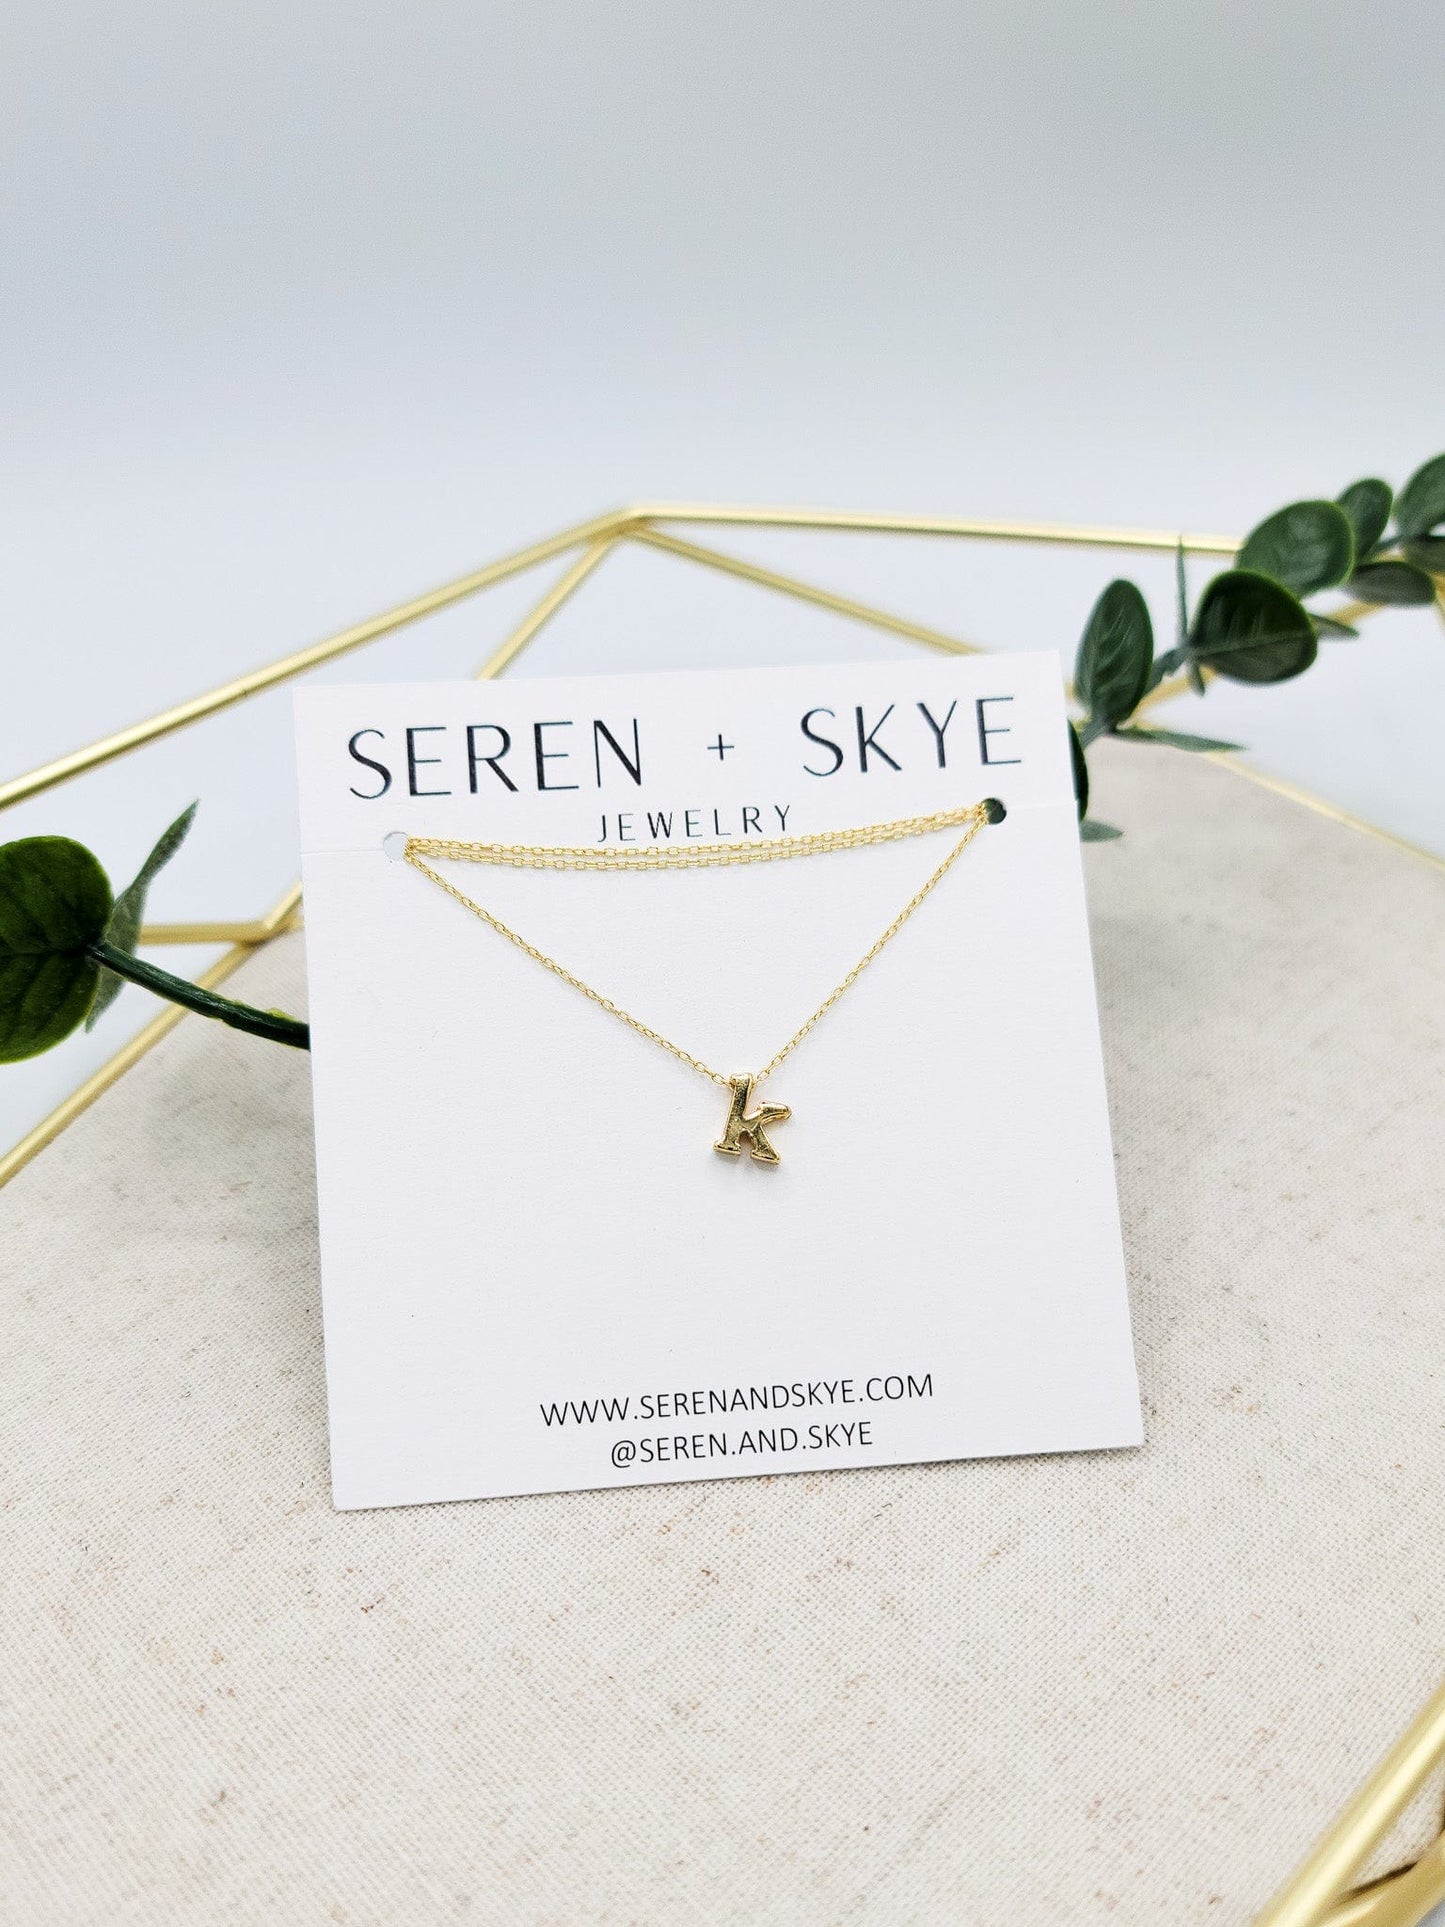 Skye Silver Initial Necklace